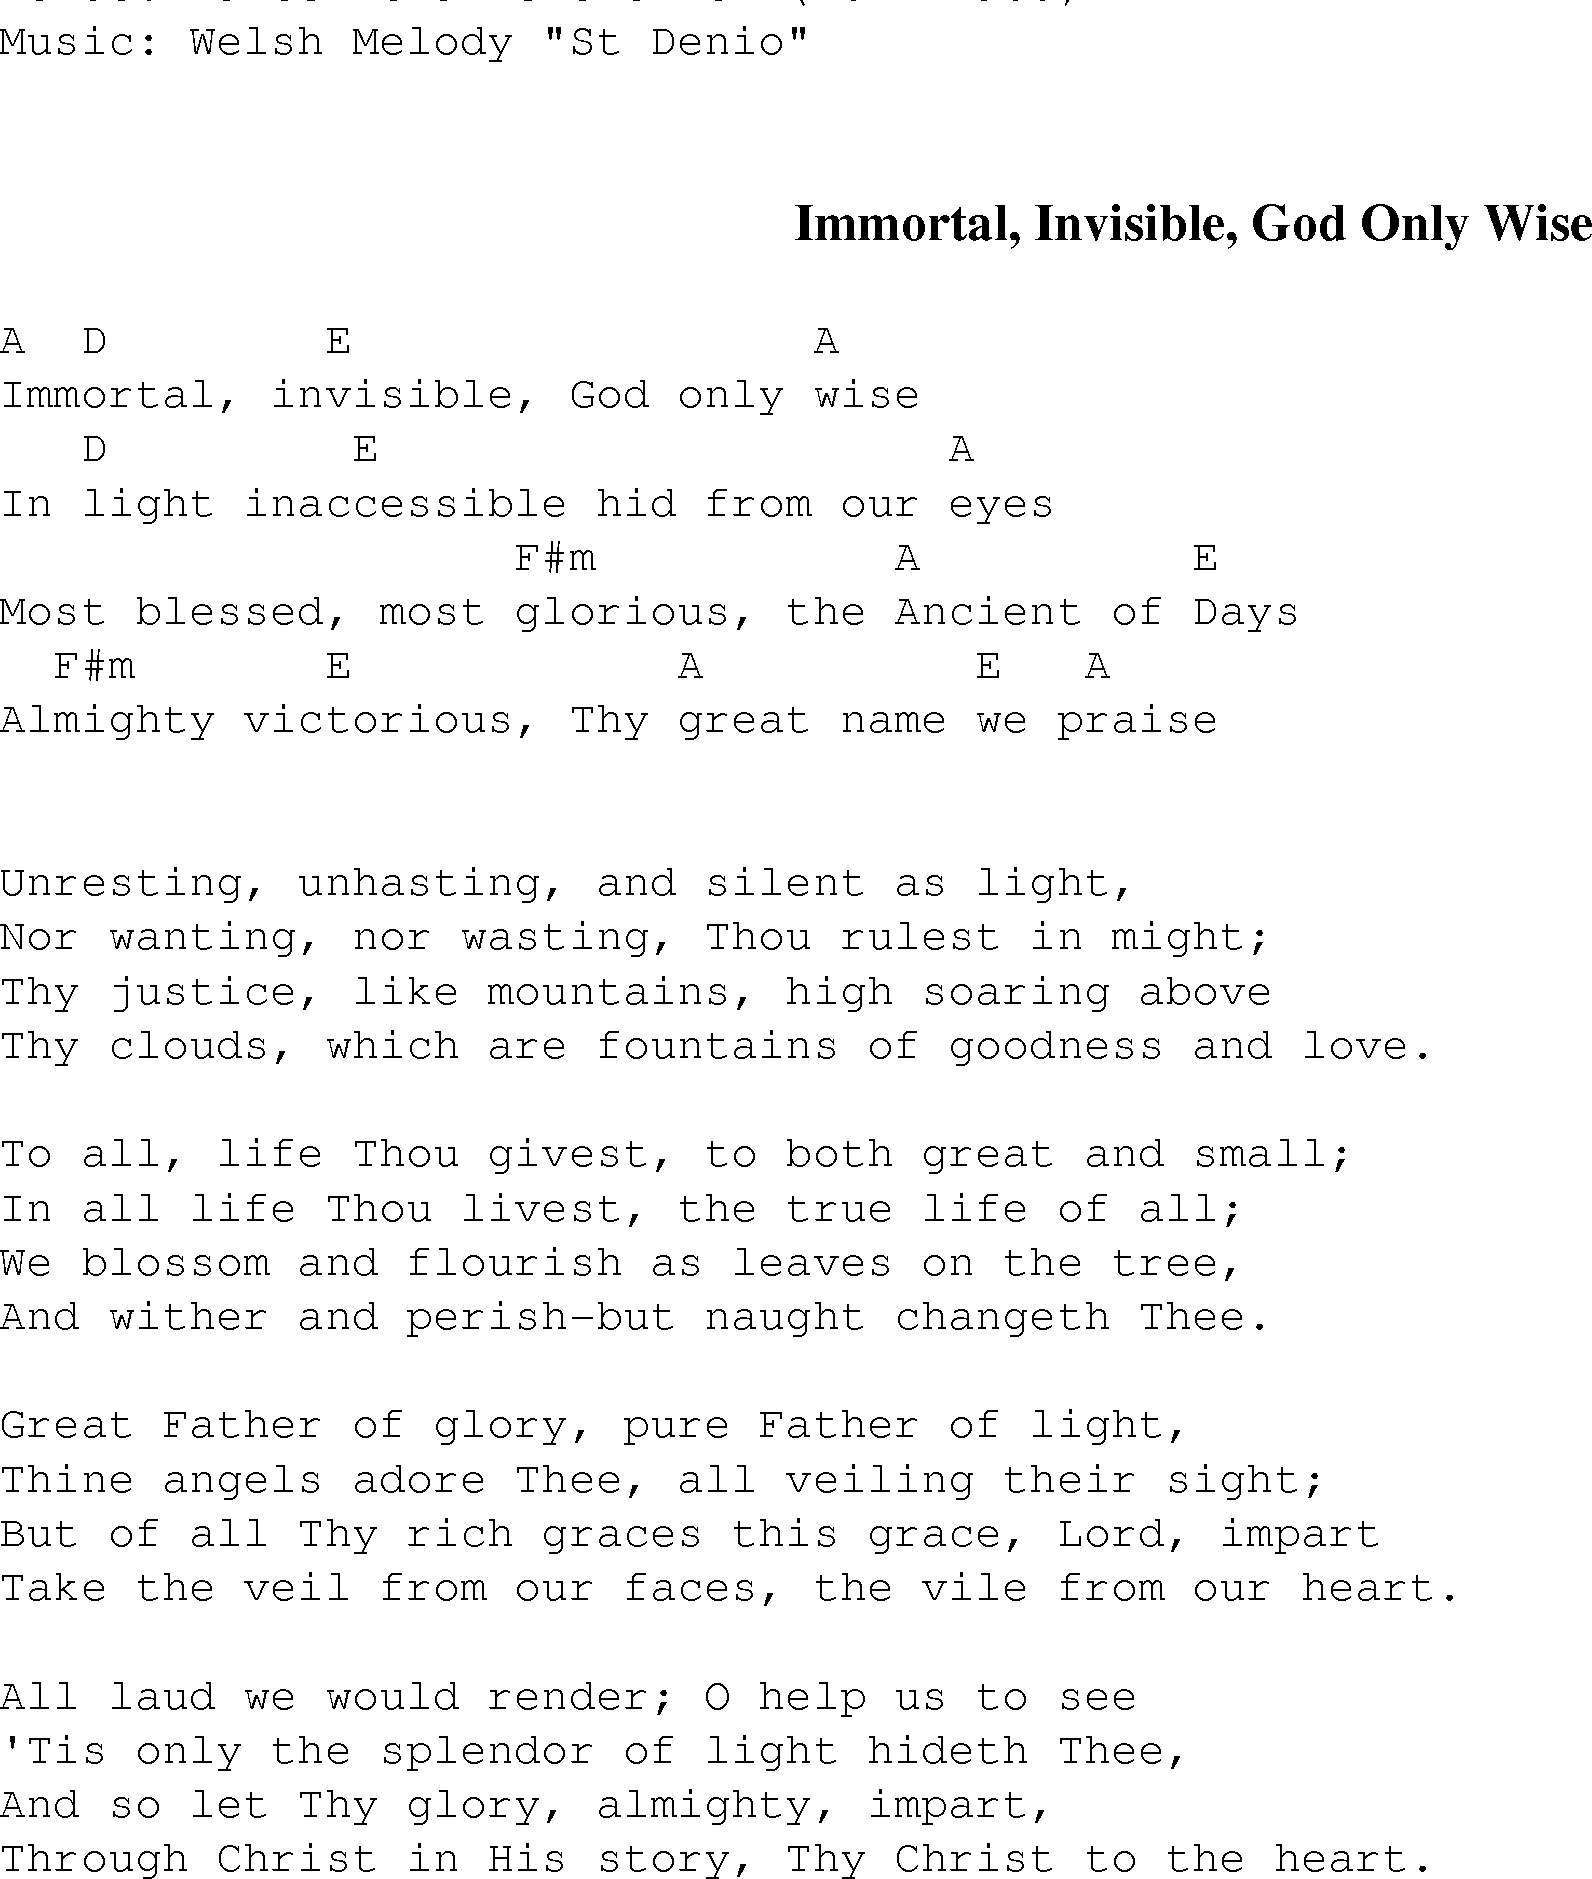 Gospel Song: immortal_invisible_god_only_wise, lyrics and chords.